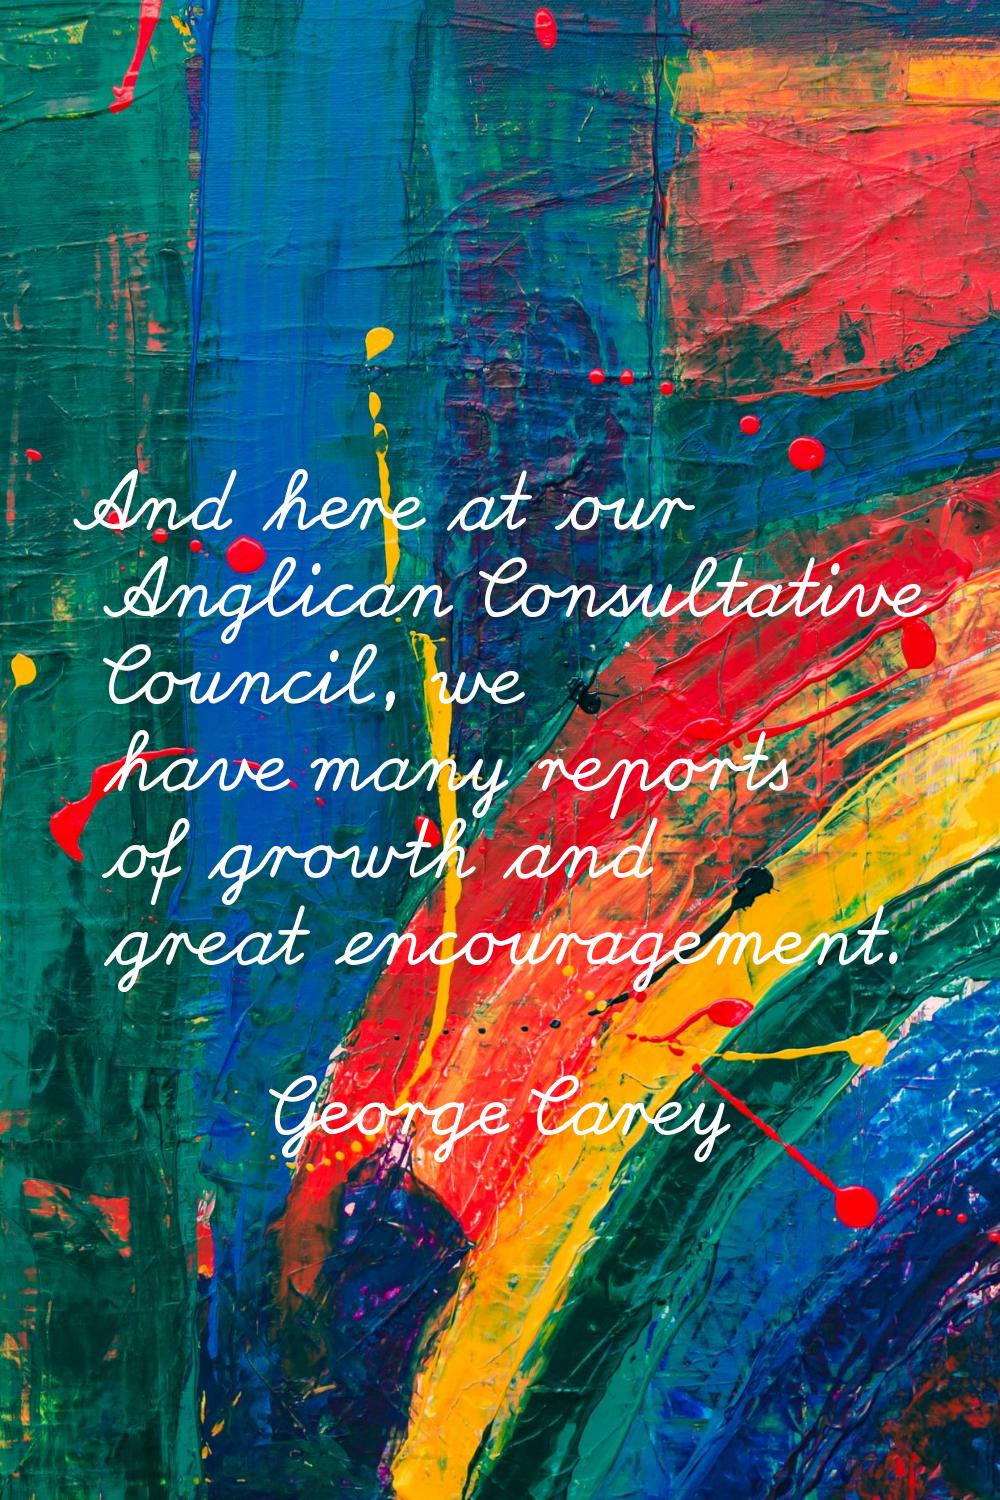 And here at our Anglican Consultative Council, we have many reports of growth and great encourageme